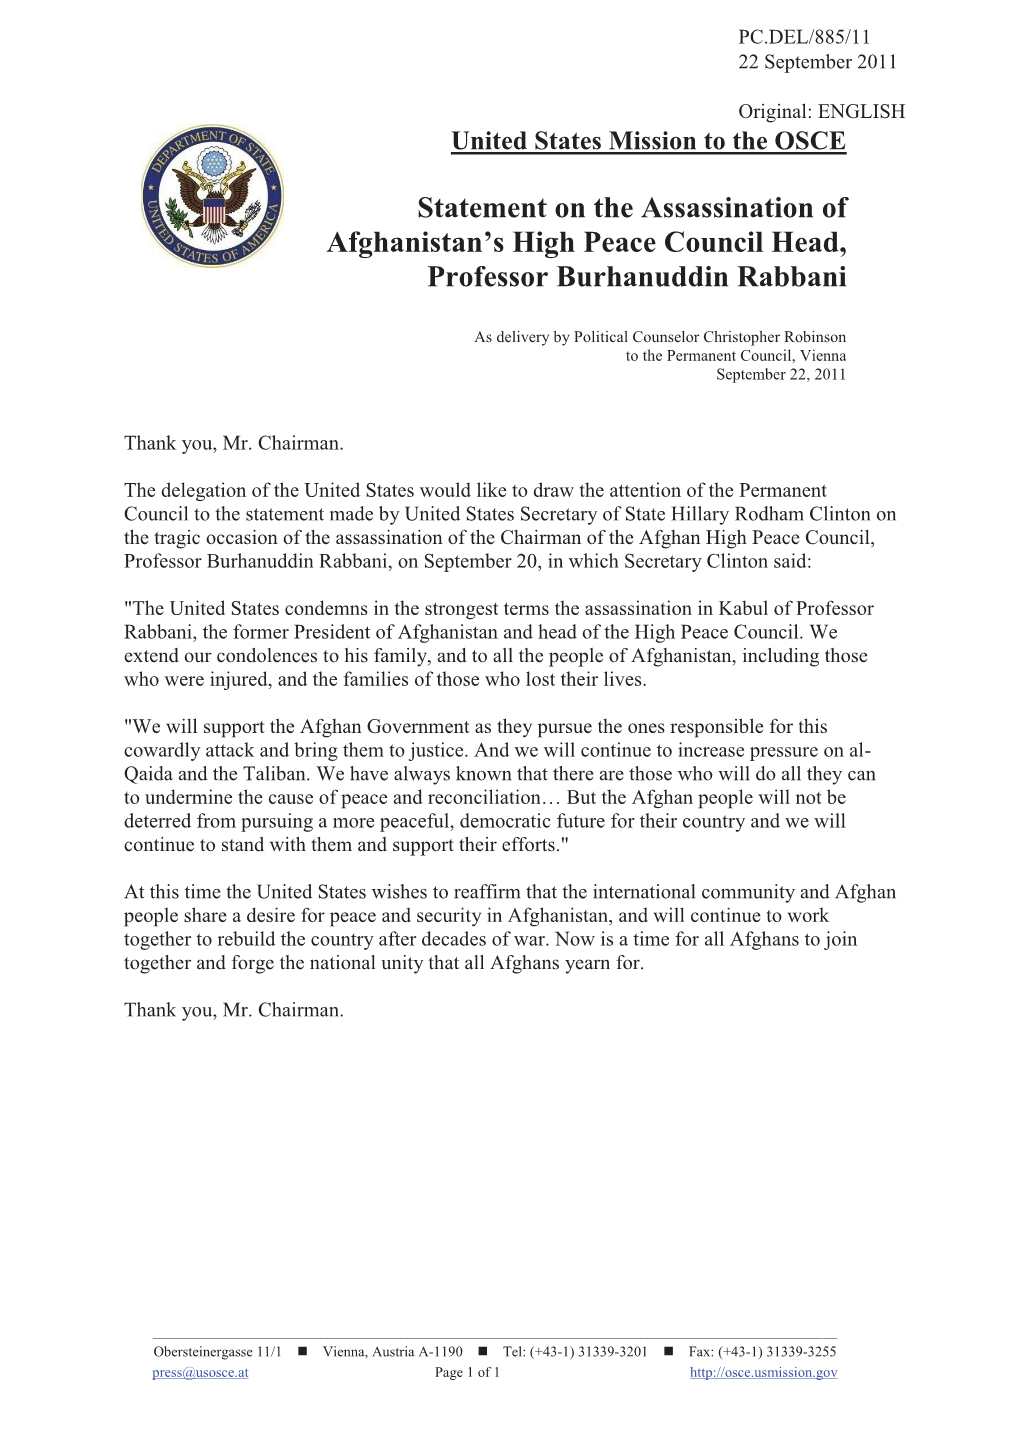 Statement on the Assassination of Afghanistan's High Peace Council